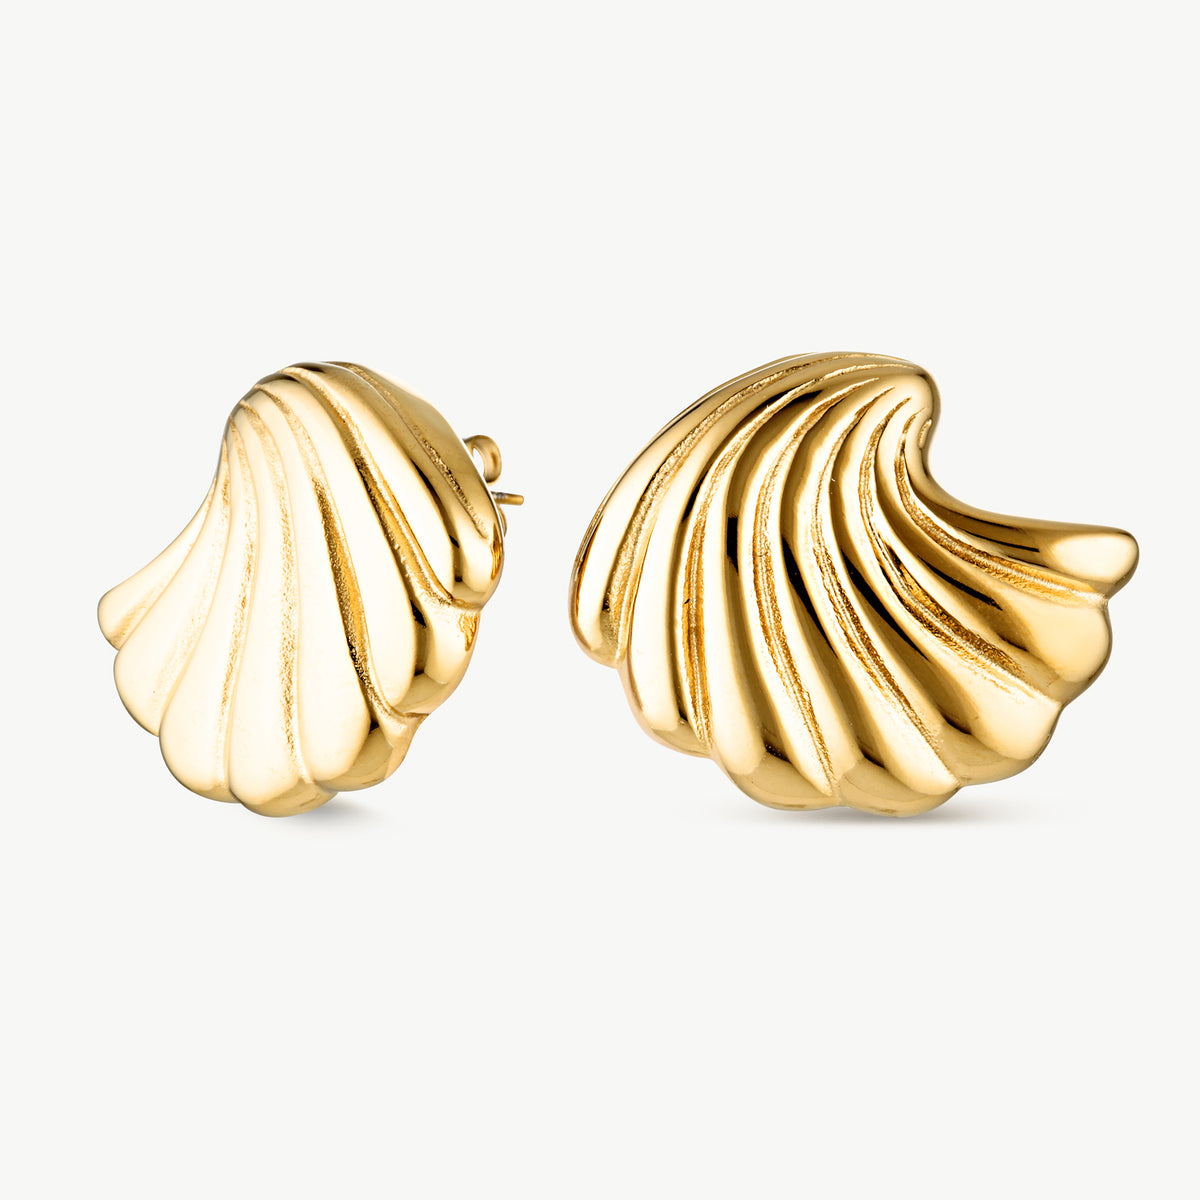 Everly Gold Earrings